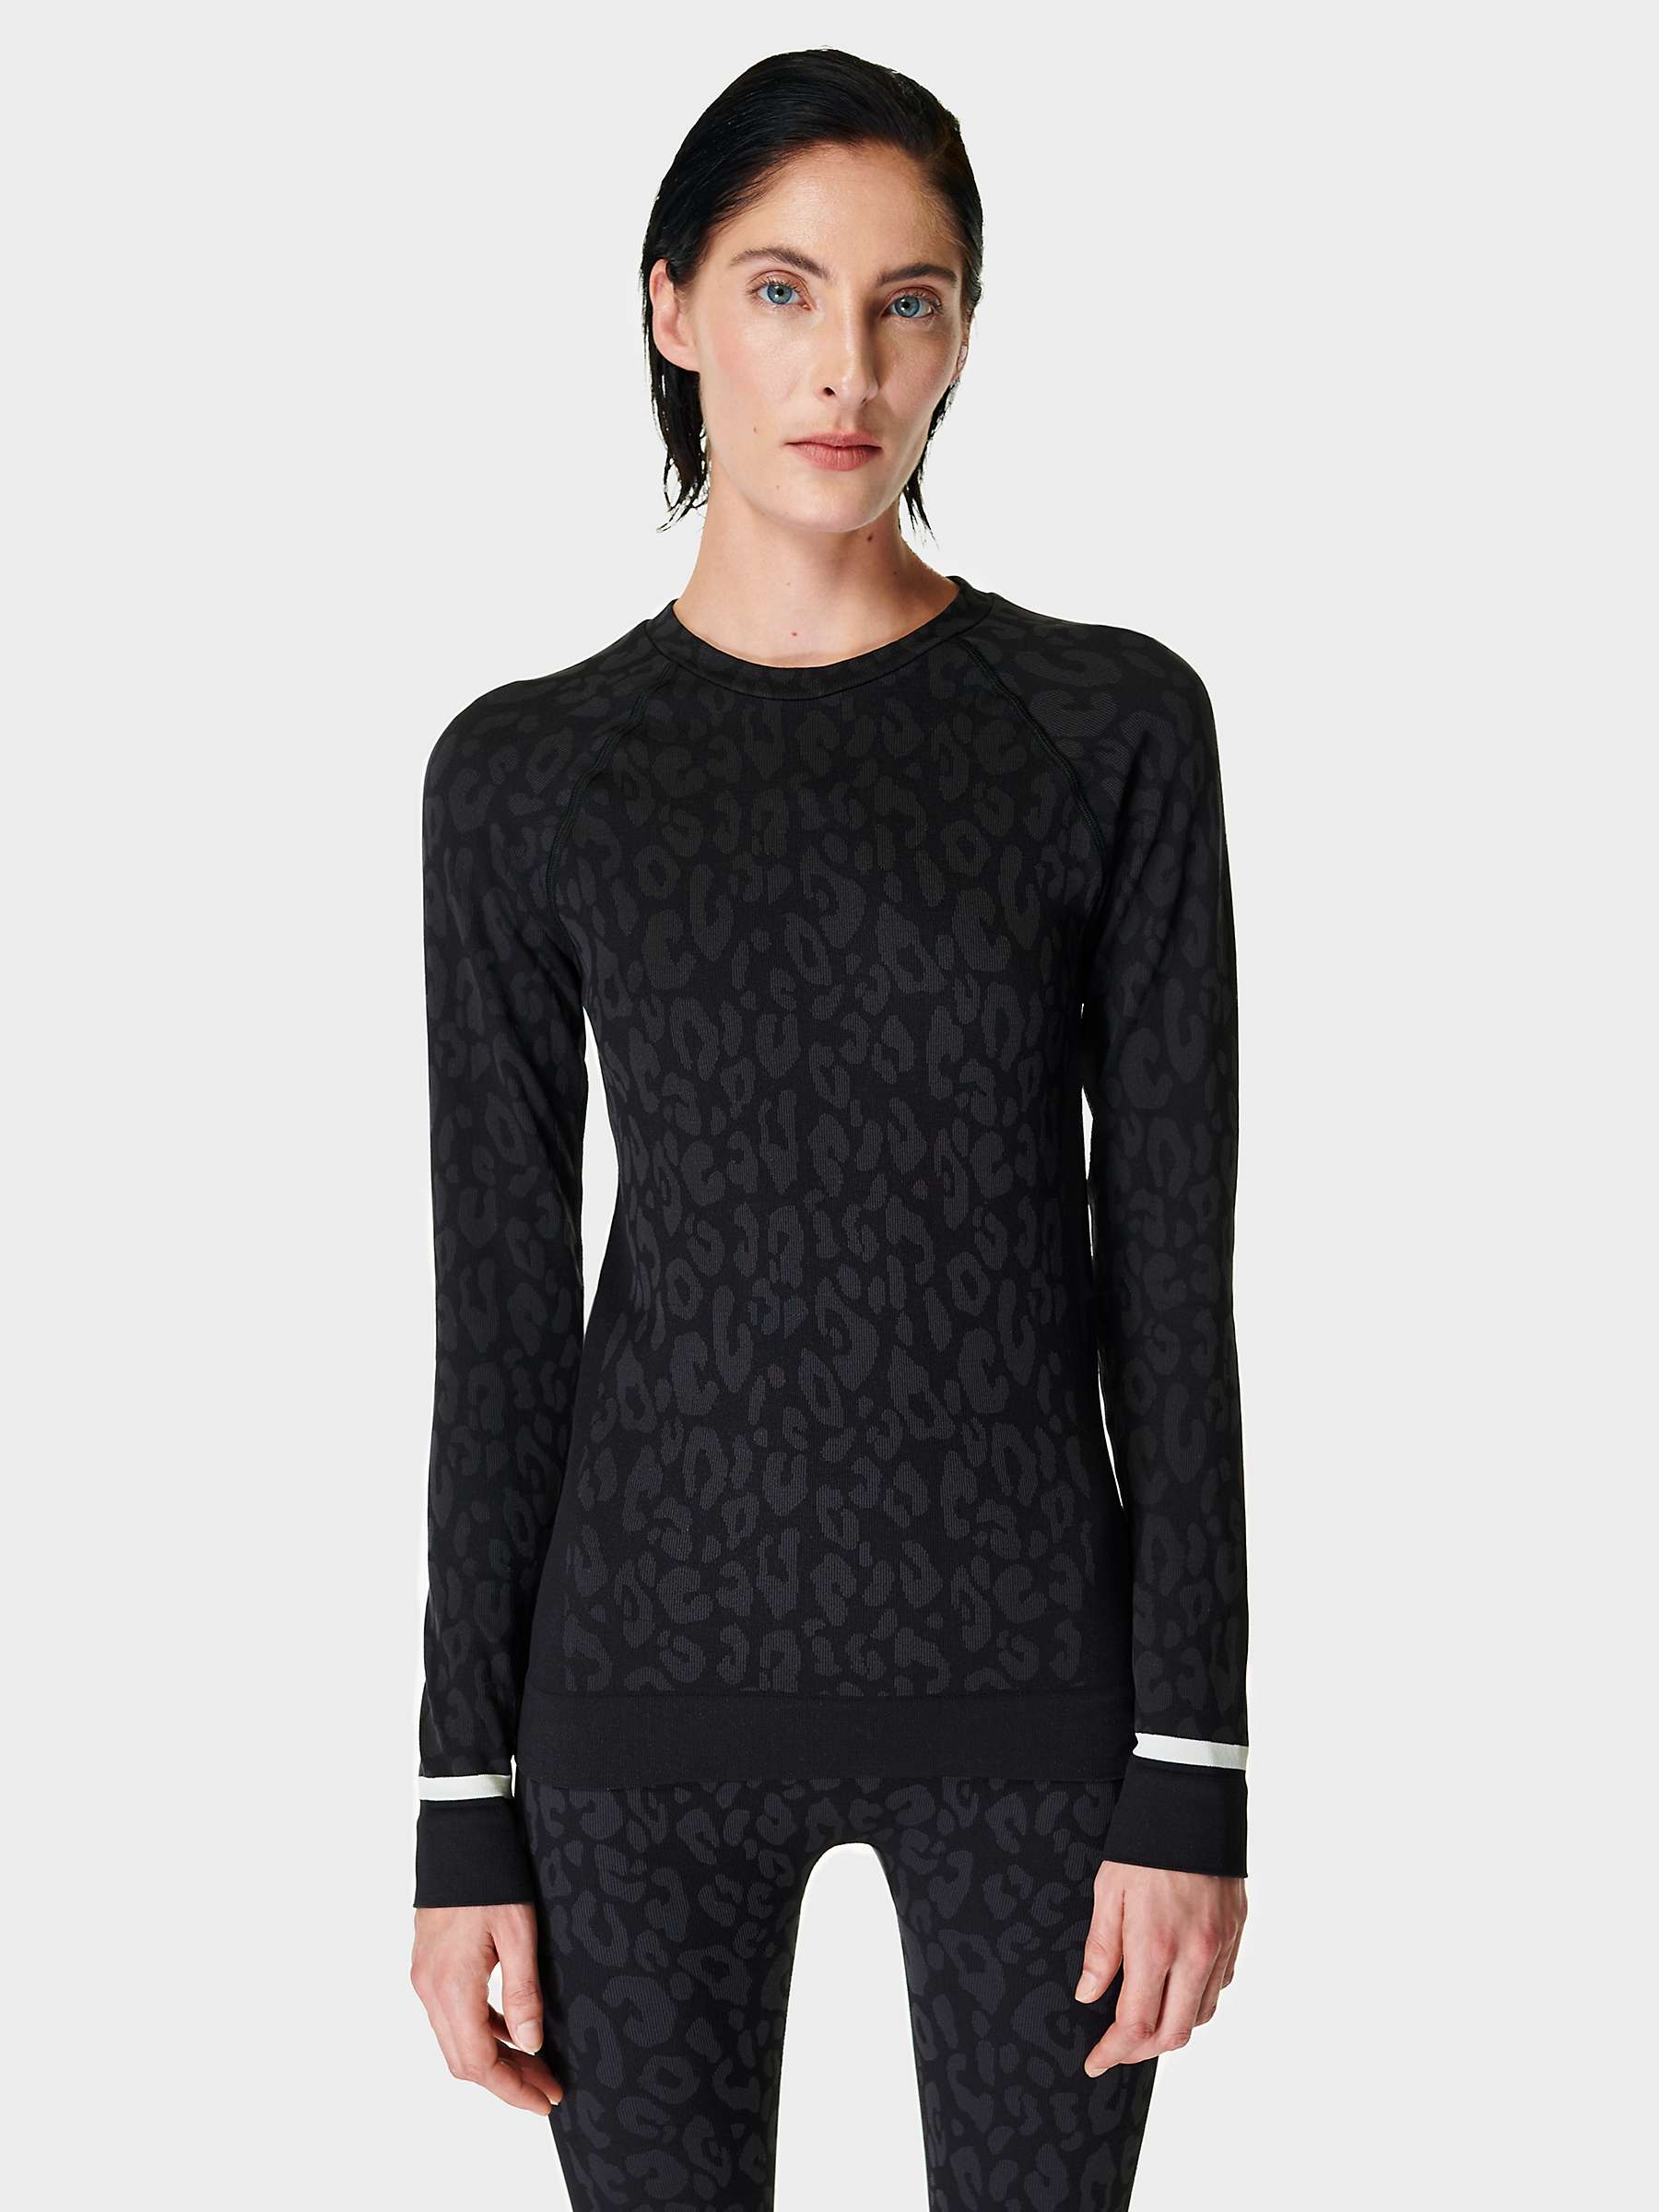 Buy Sweaty Betty Leopard Jacquard Base Layer Top Online at johnlewis.com